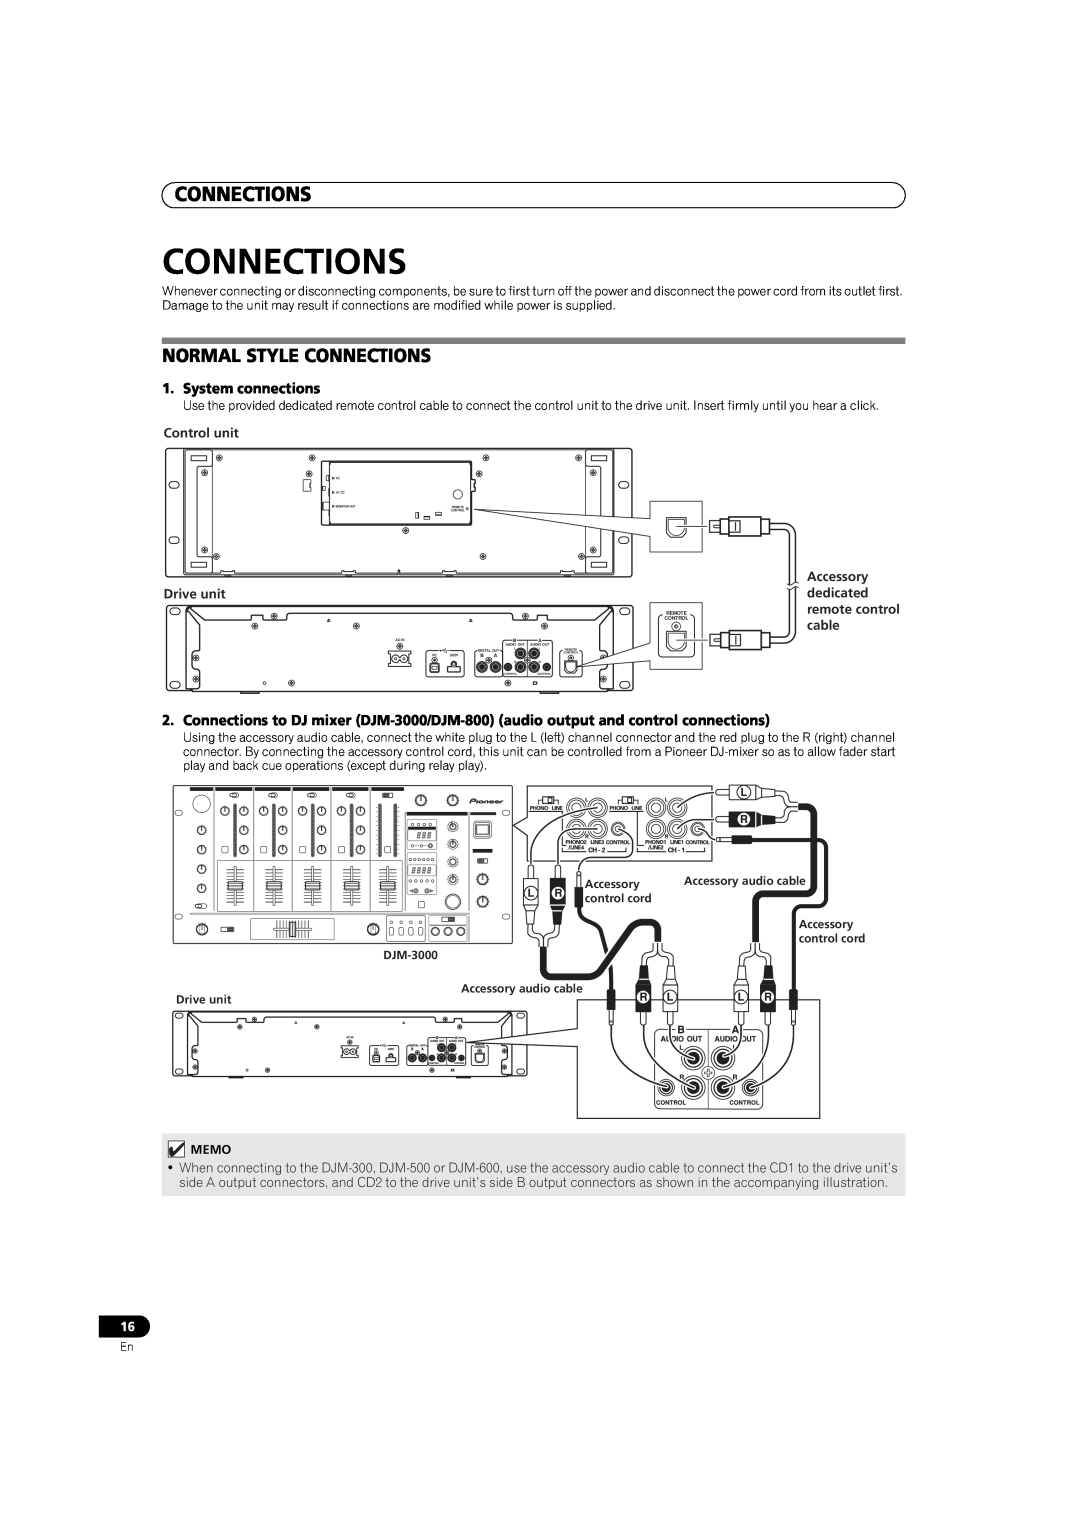 Pioneer MEP-7000 Normal Style Connections, Control unit, Drive unit, Accessory dedicated remote control cable 